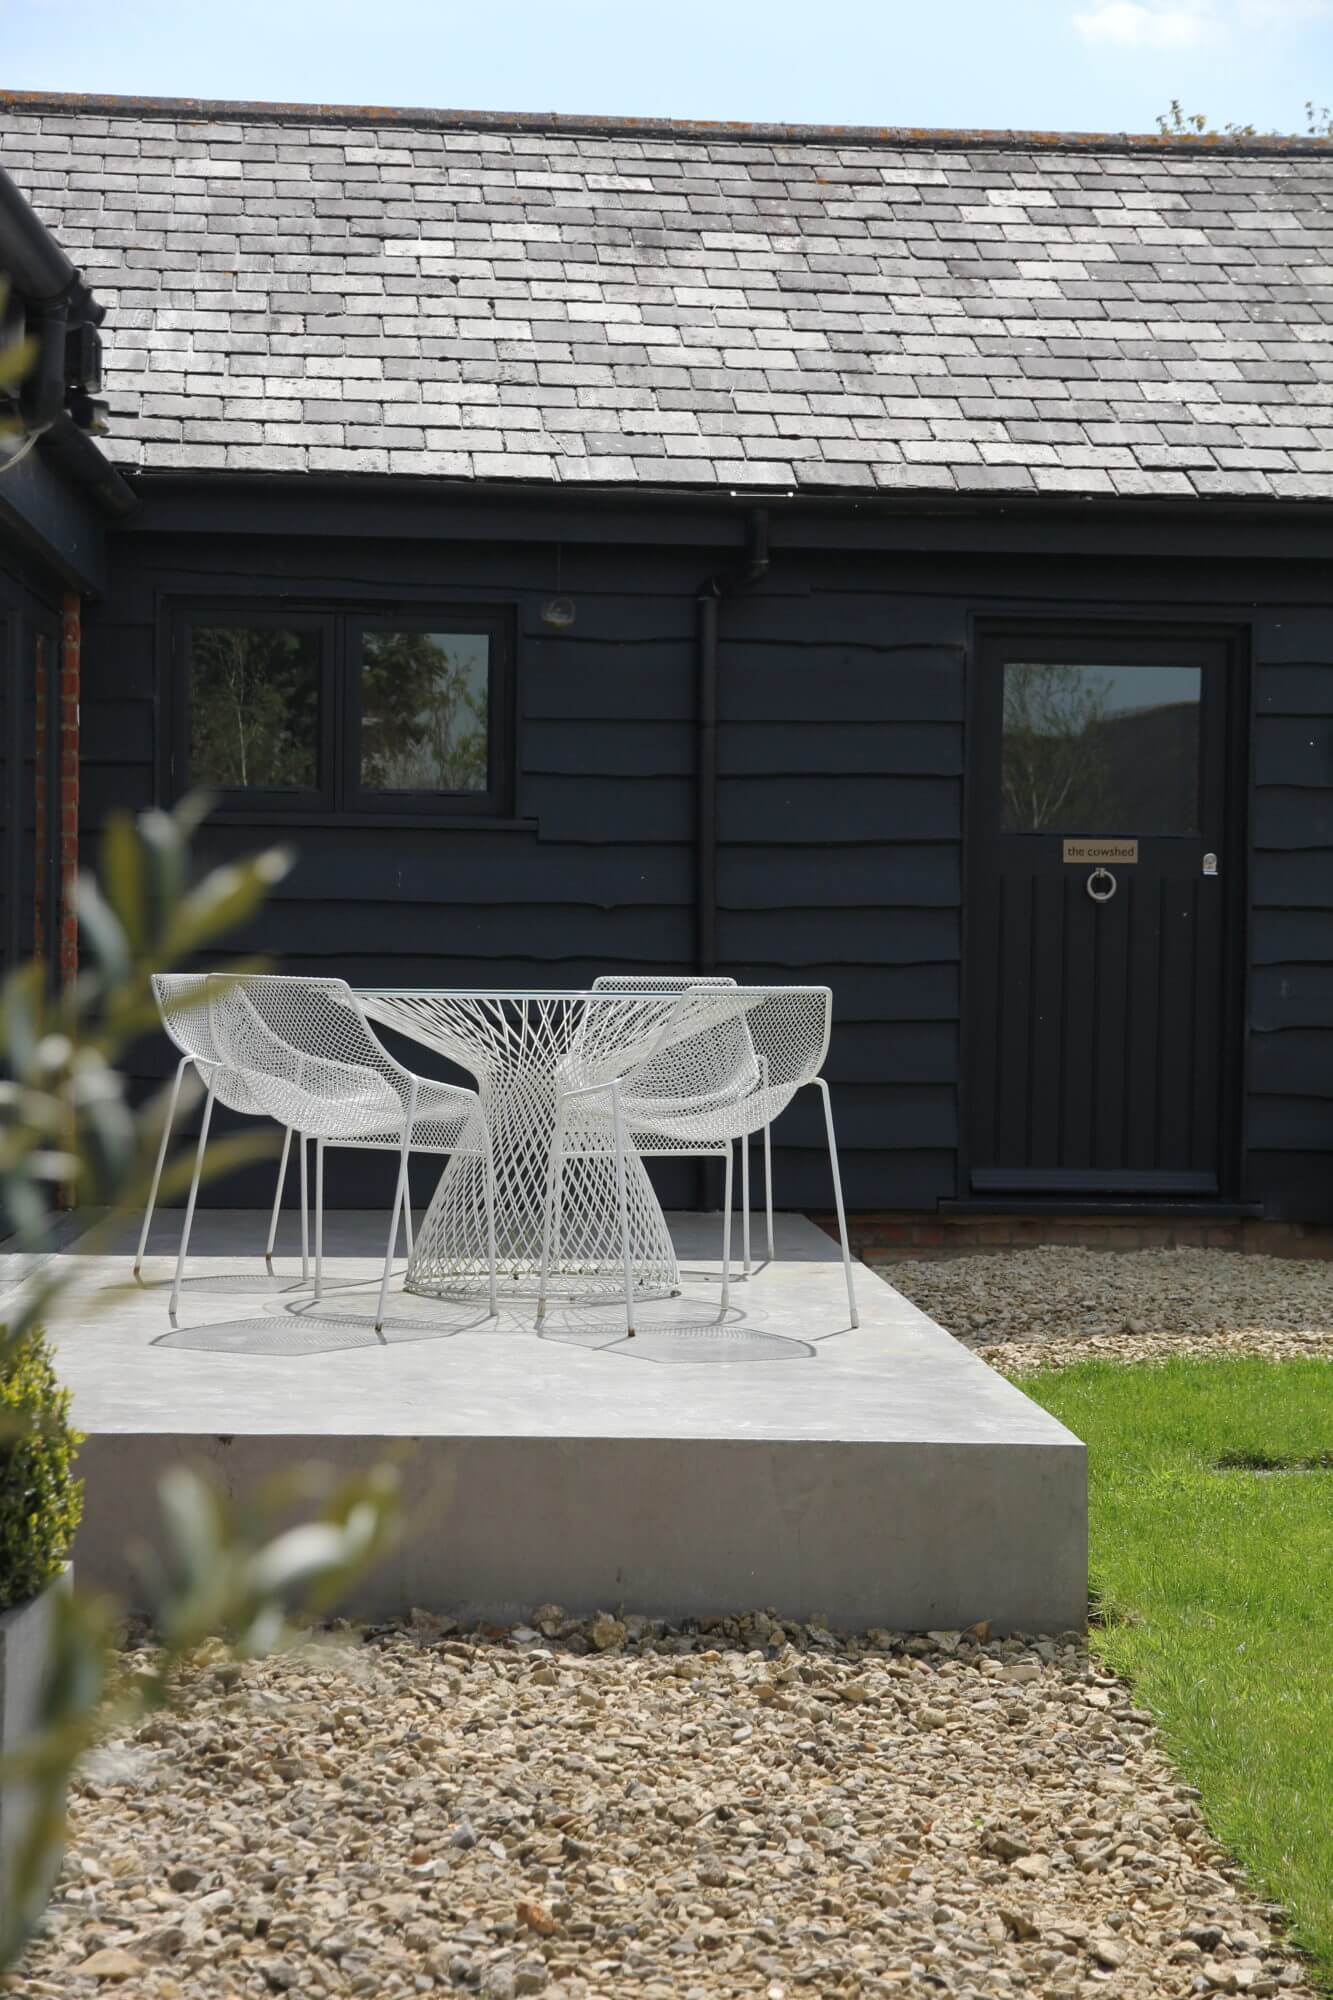 cowshed barn conversion garden with white garden furniture and concrete patio